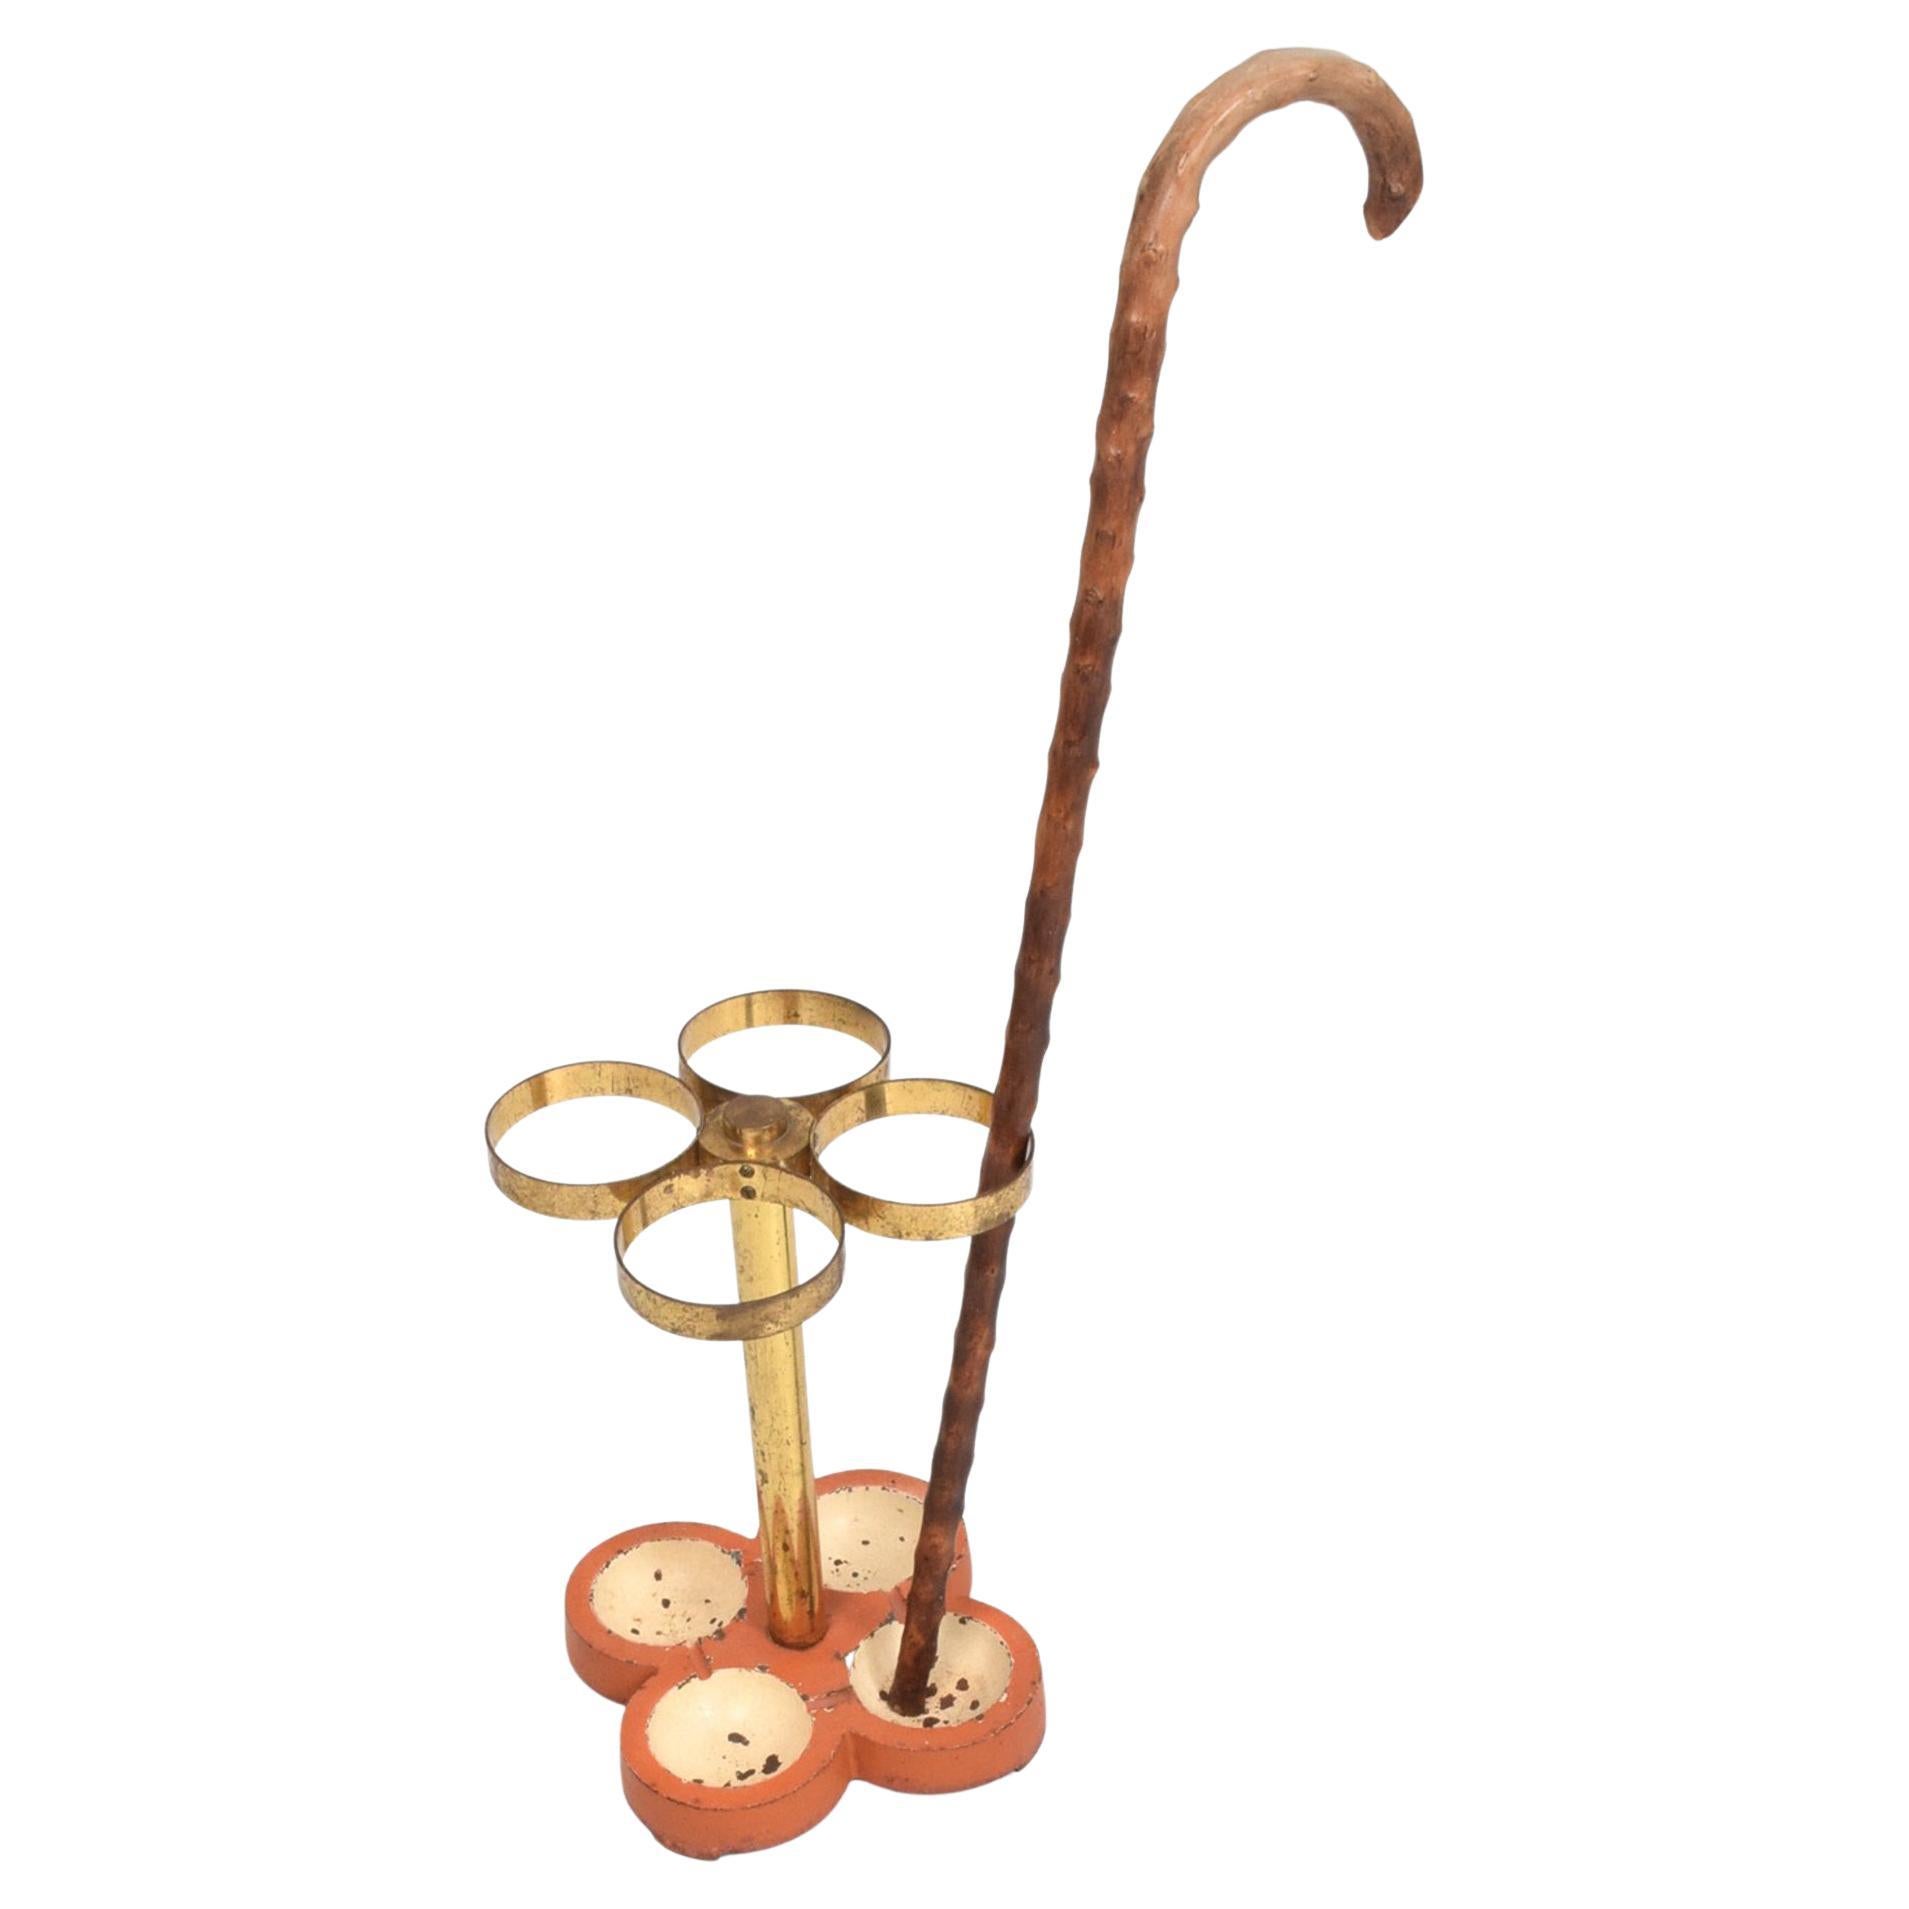 AMBIANIC presents
Vintage Brass Cast Iron Umbrella Stand Cane Holder
similar to Hermes Paris Style 1960s.
Bauhaus Modernist design from Germany.
Wear consistent with age and use. 
Original unrestored vintage preowned condition.
Expect vintage